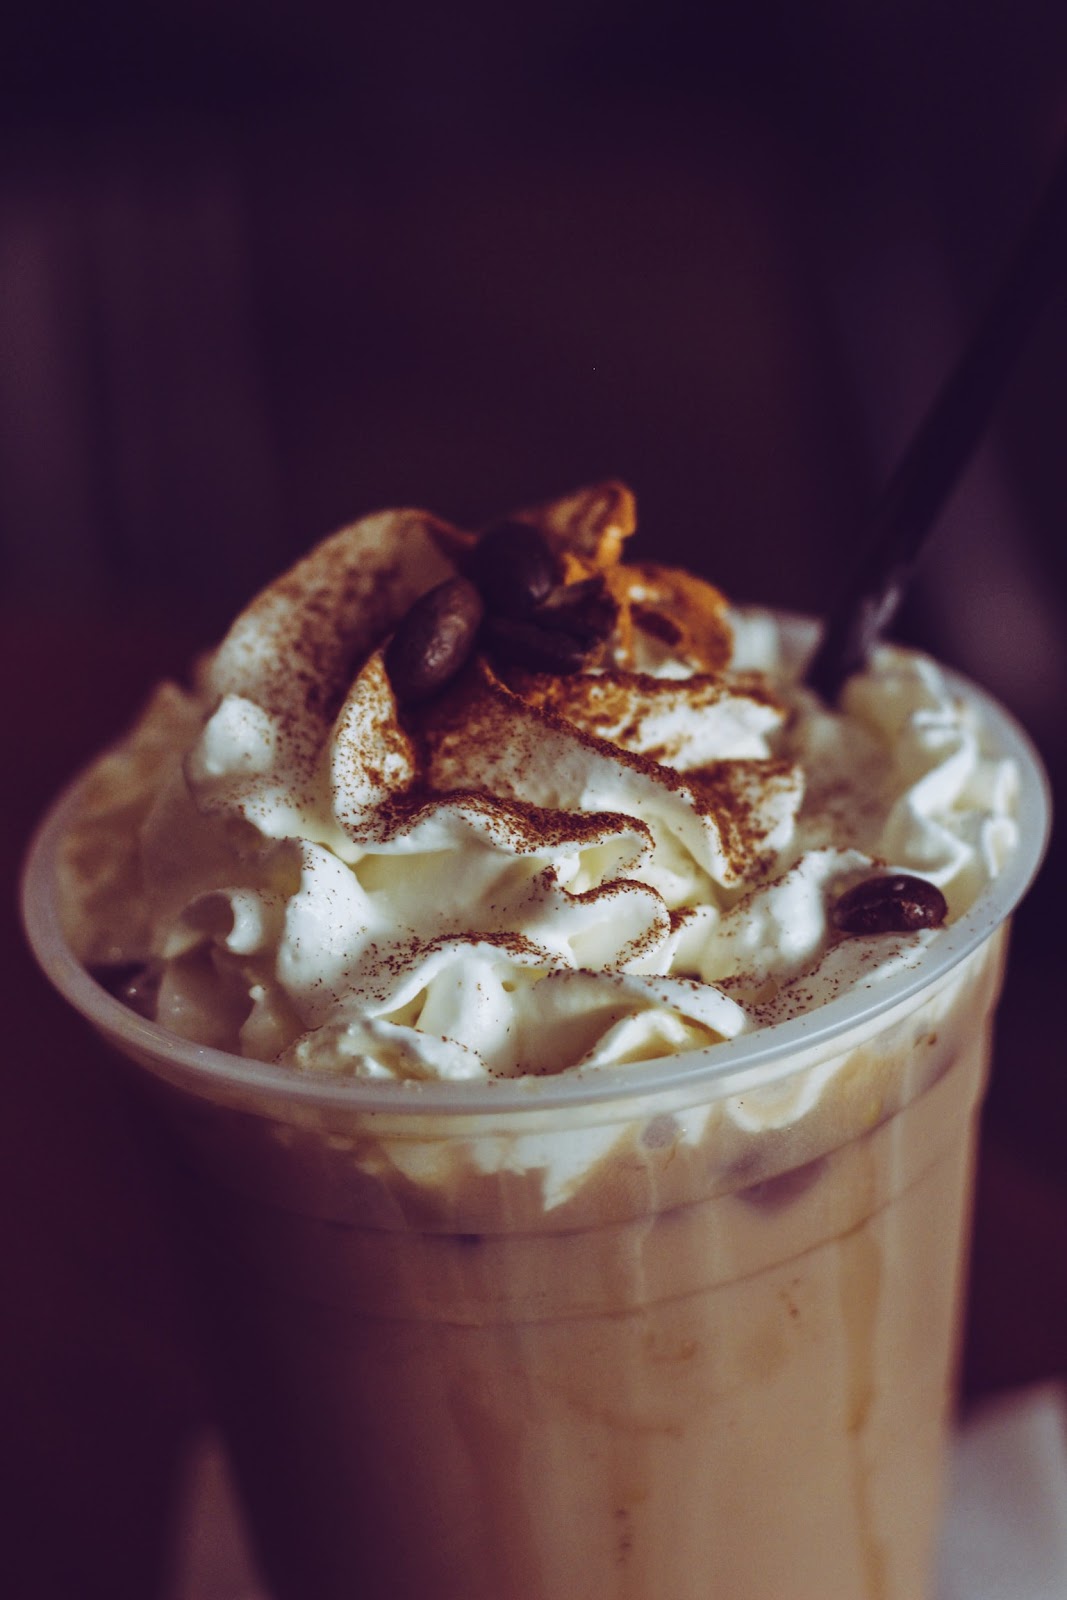 How Much Caffeine Is in a Mocha Cookie Crumble?